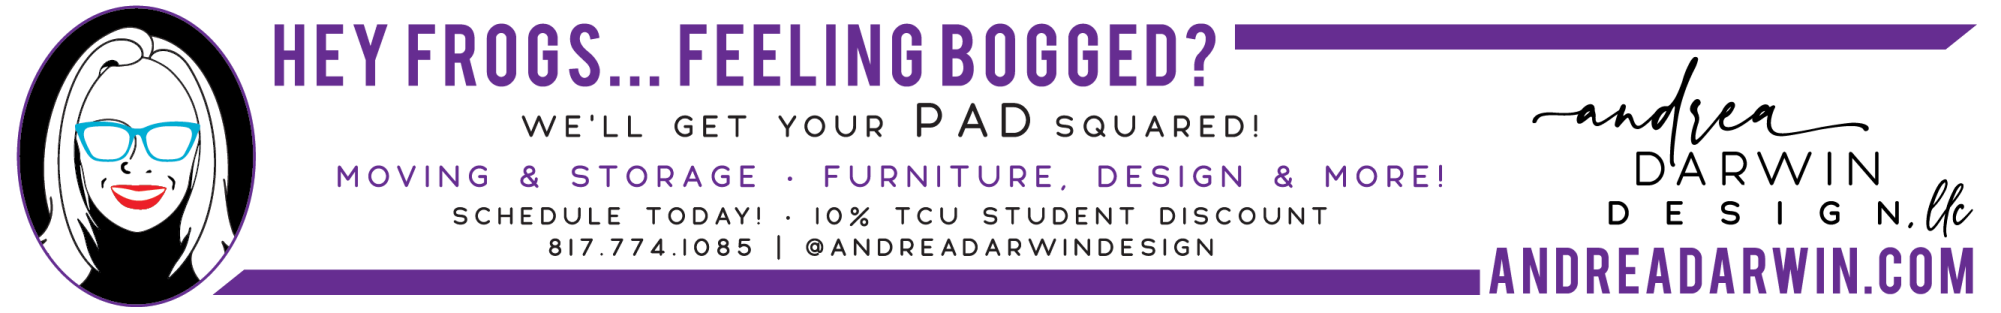 Ad text: Hey frogs. Feeling bogged? Well get your pad squared! Moving and storage, furniture design and more. Schedule today! Ten percent T C U student discount. Andrea Darwin Design L L C. andrea darwin dot com. 817-774-1085. @andreadarwindesign